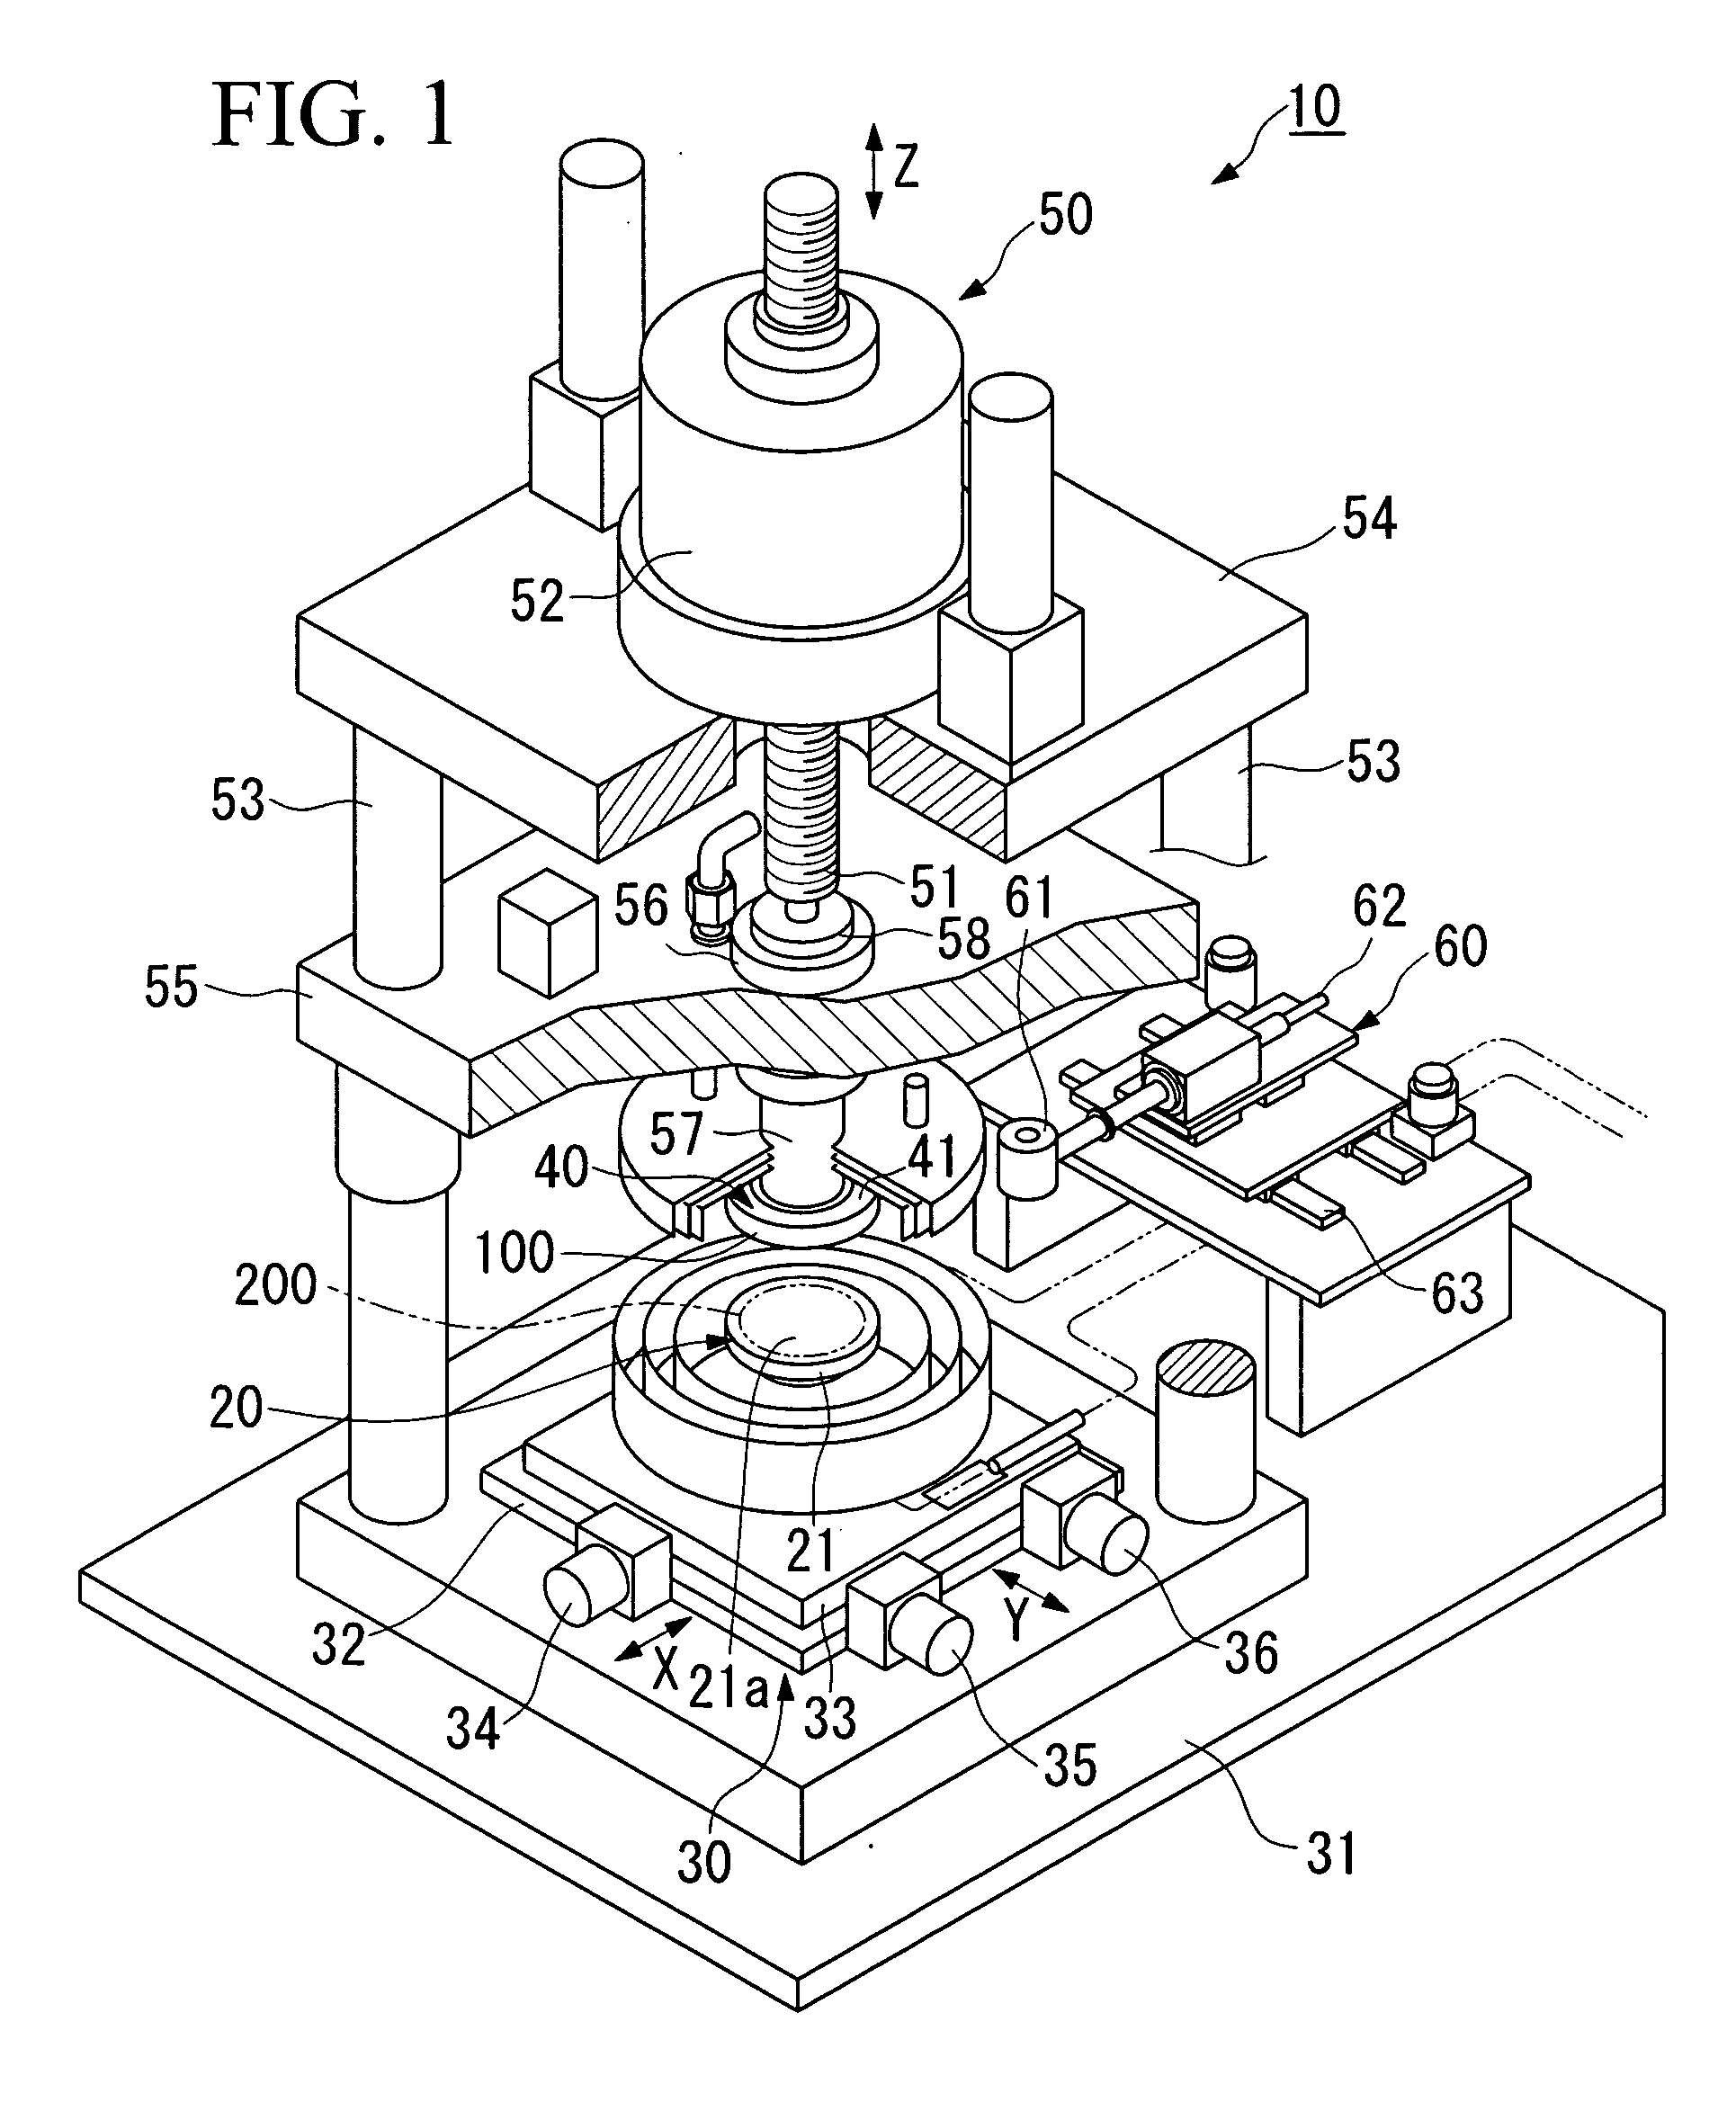 Device, method, and system for pattern forming